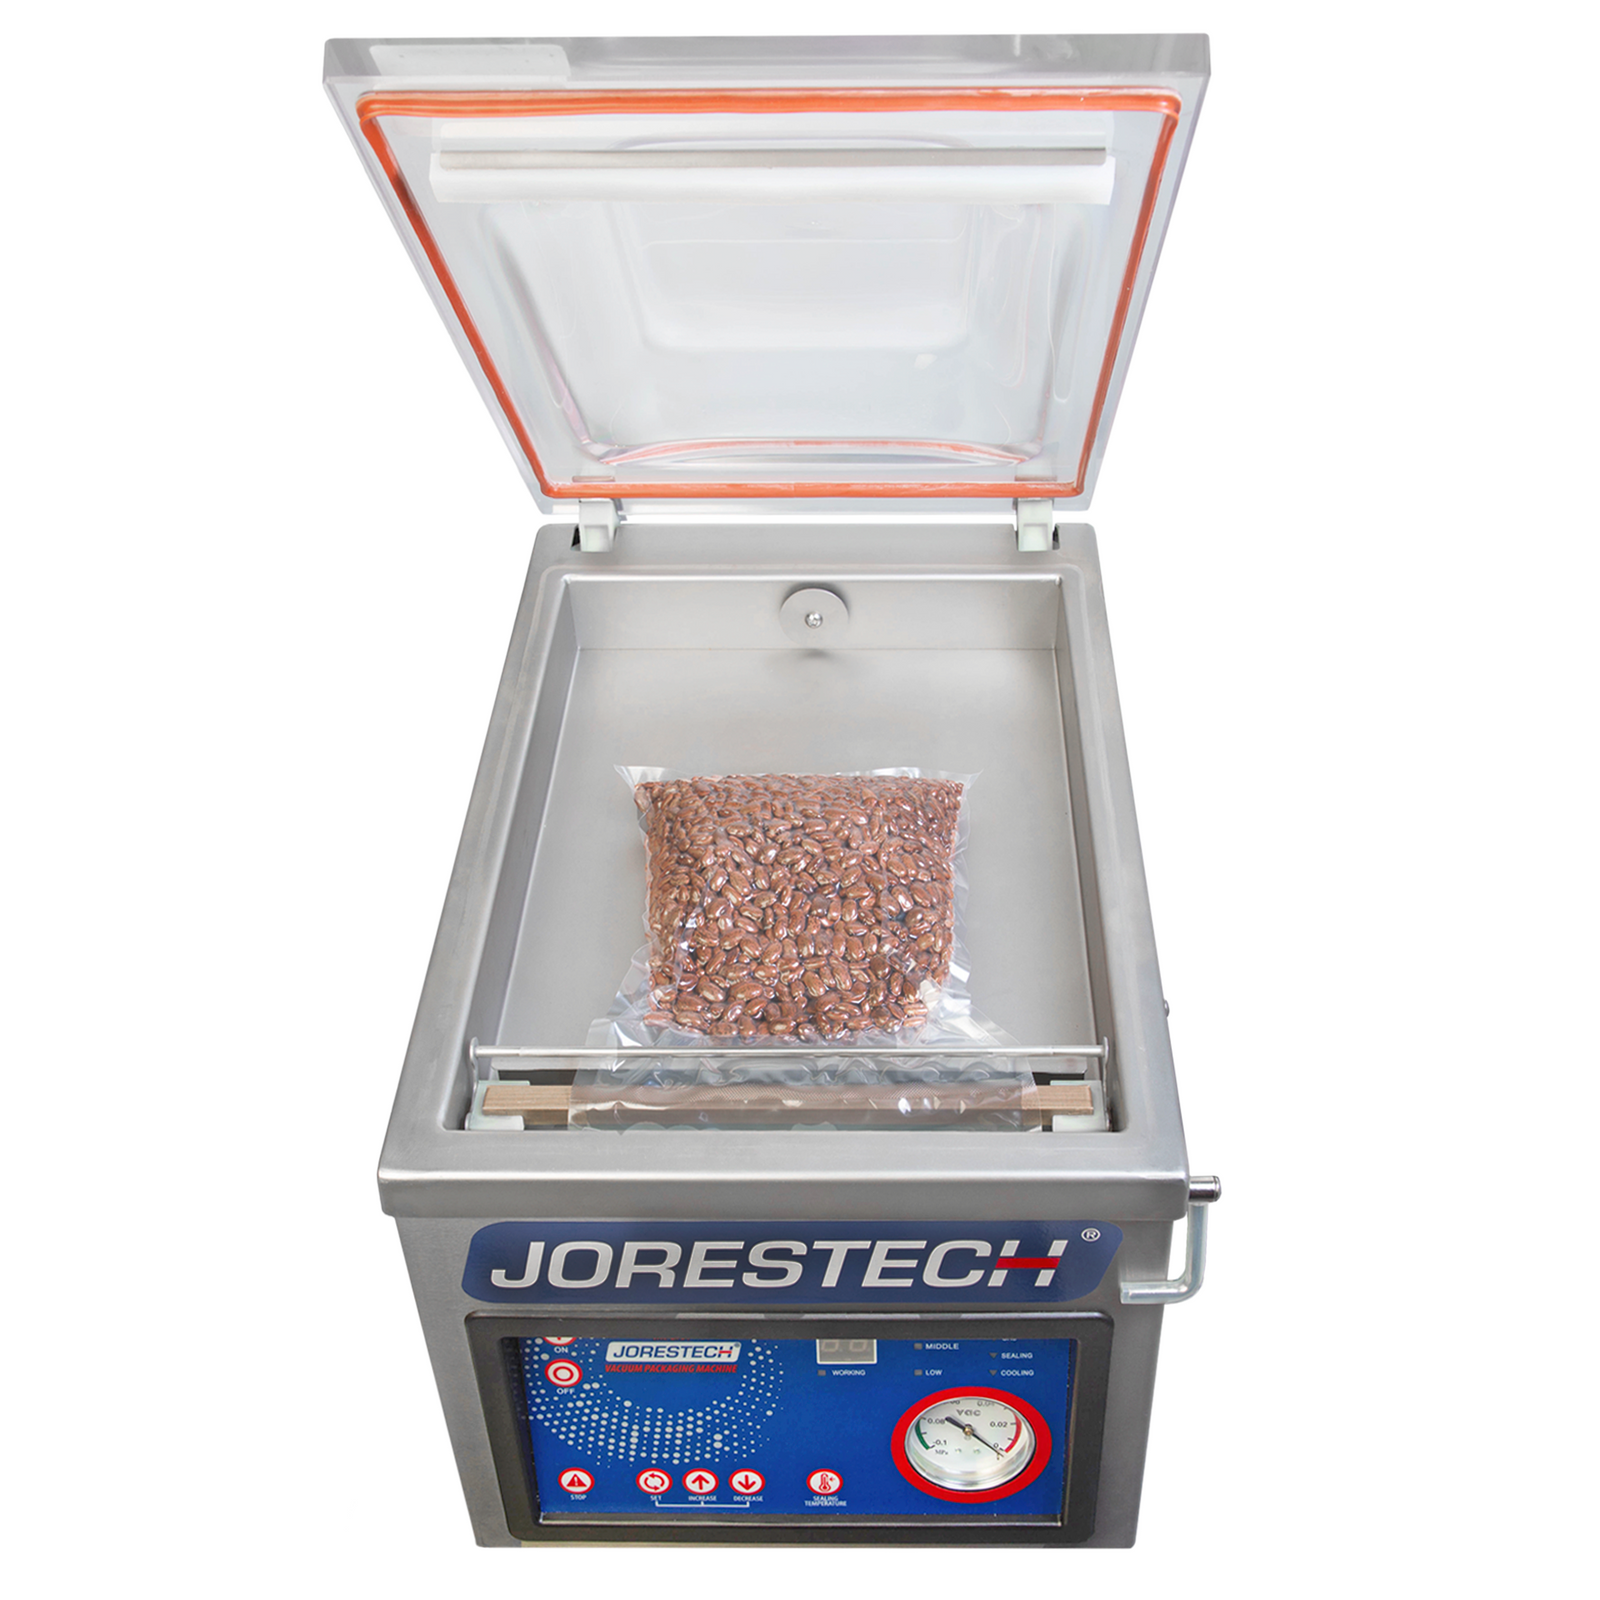 Vacuumed bag with red beans positioned inside the heating element of the sealing chamber